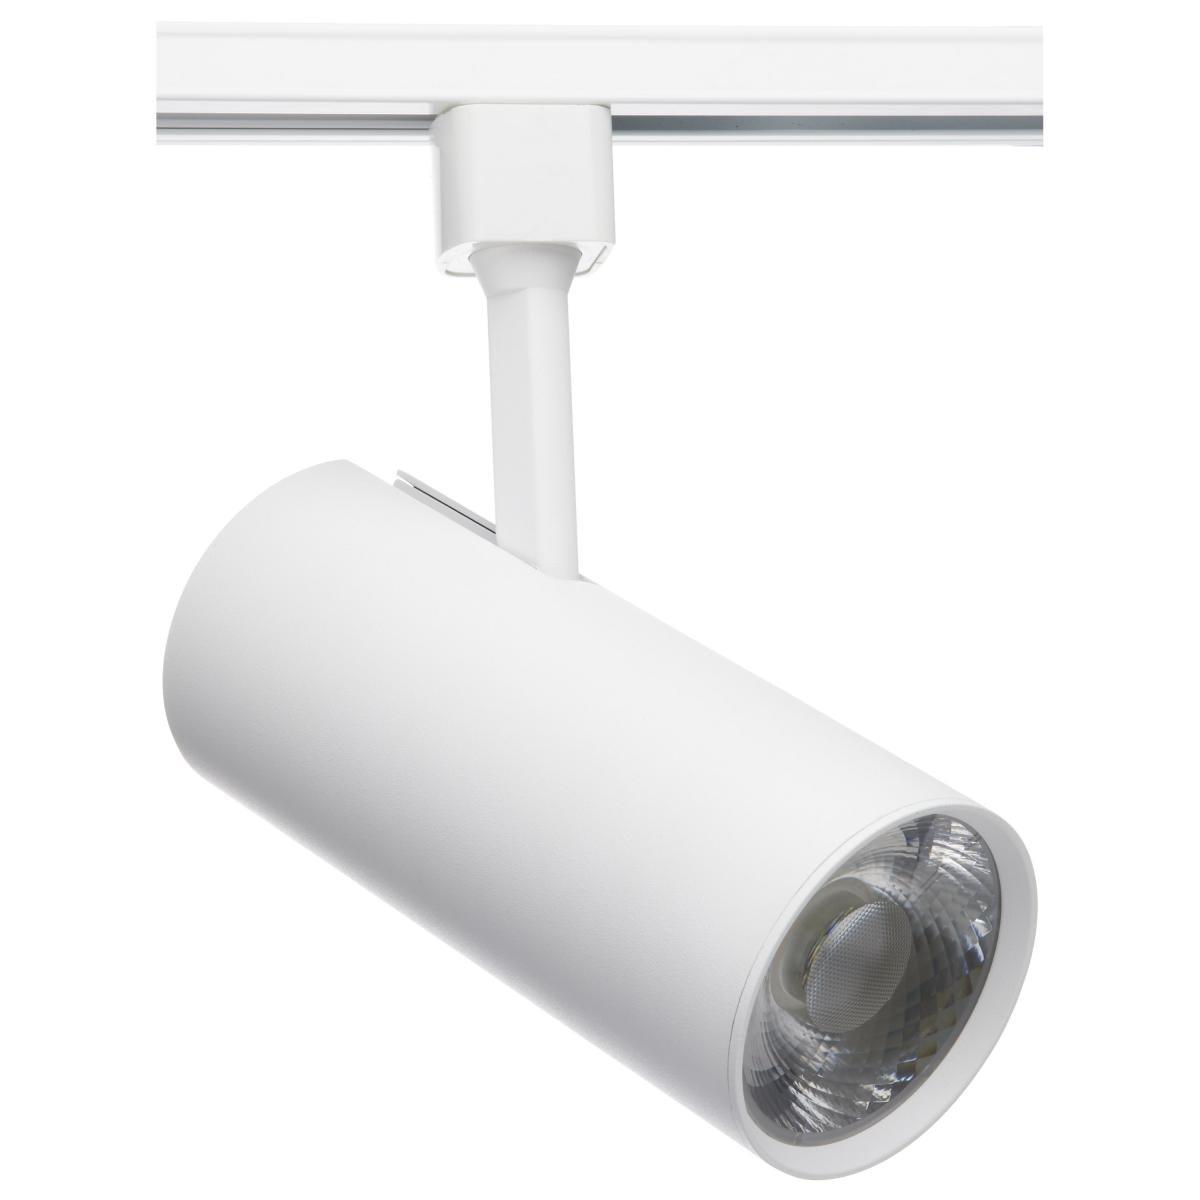 Pro LED Commercial Track Head, 30W, 3000K, 2000 Lumens, Halo (H)